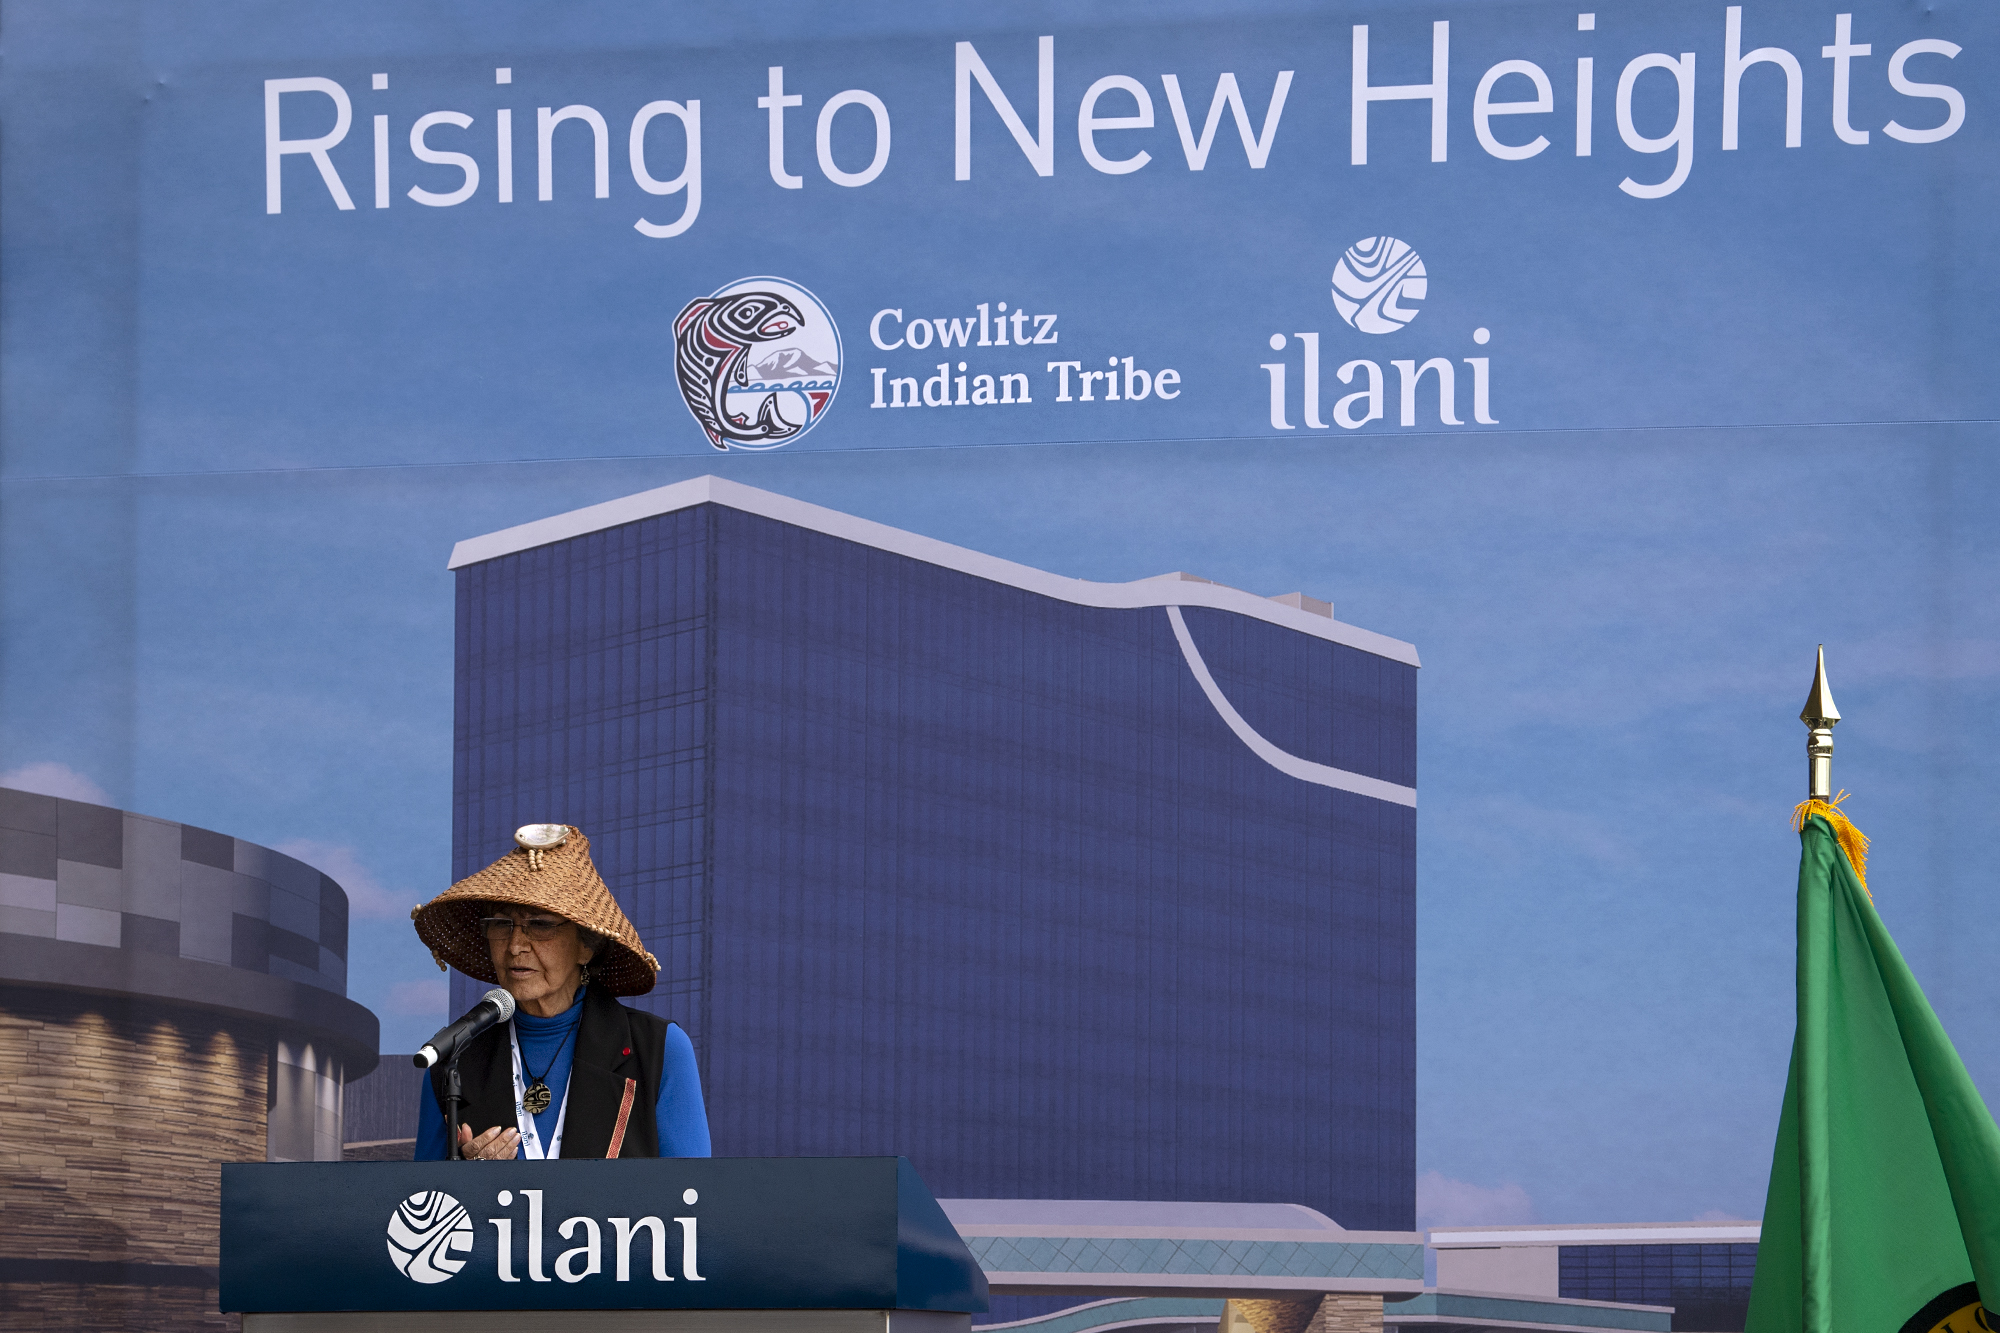 Tanna Engdahl, Cowlitz Elder and Spiritual Leader, gives a blessing on Friday, April 23, 2021, at the ilani on the Cowlitz Indian Reservation. The casino broke ground Friday on a 14-story luxury hotel.